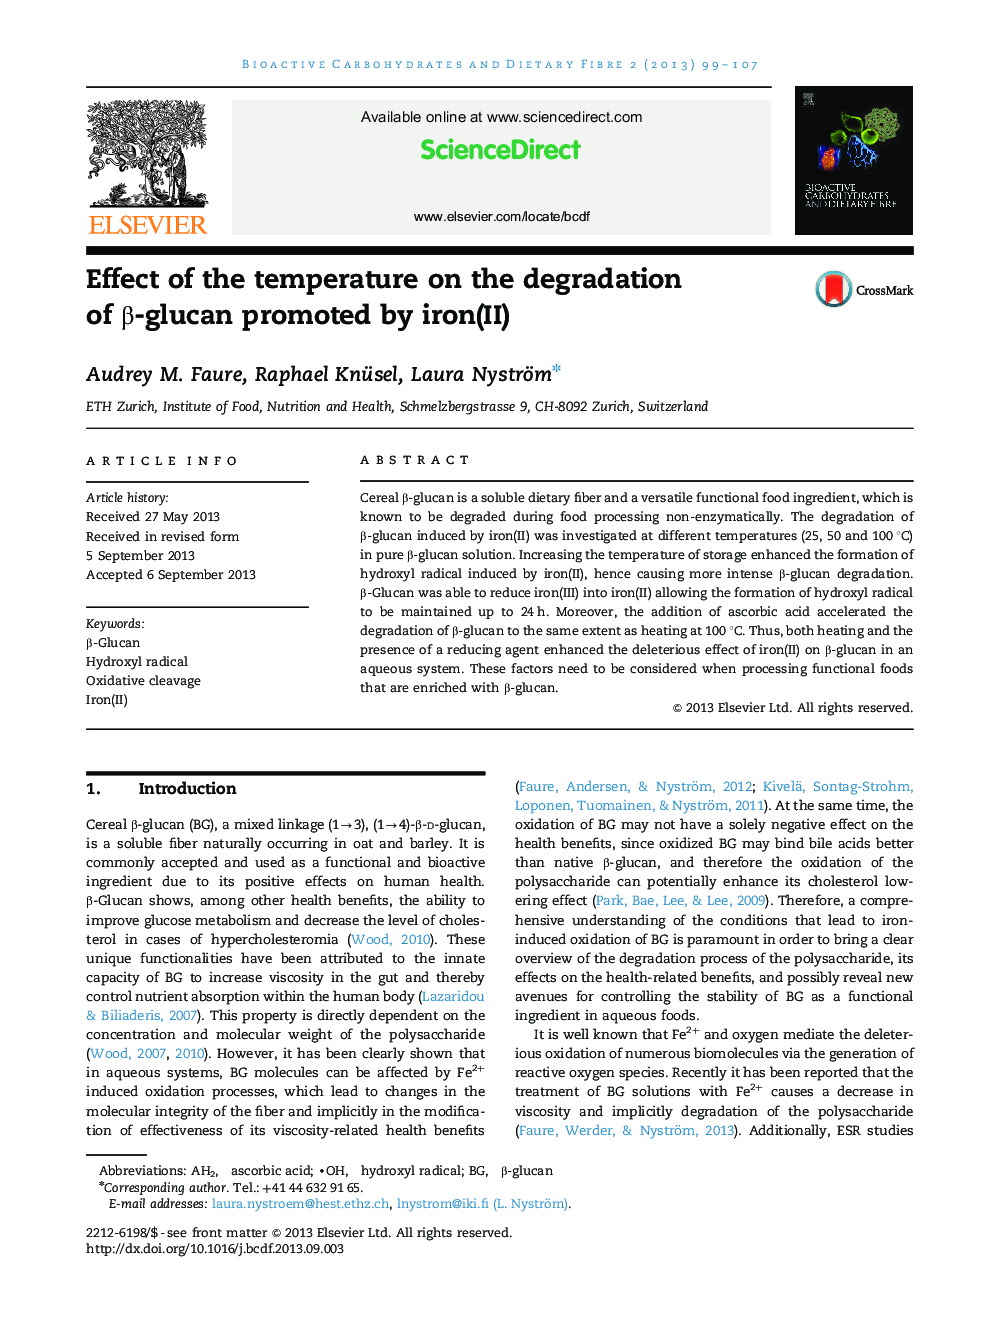 Effect of the temperature on the degradation of β-glucan promoted by iron(II)